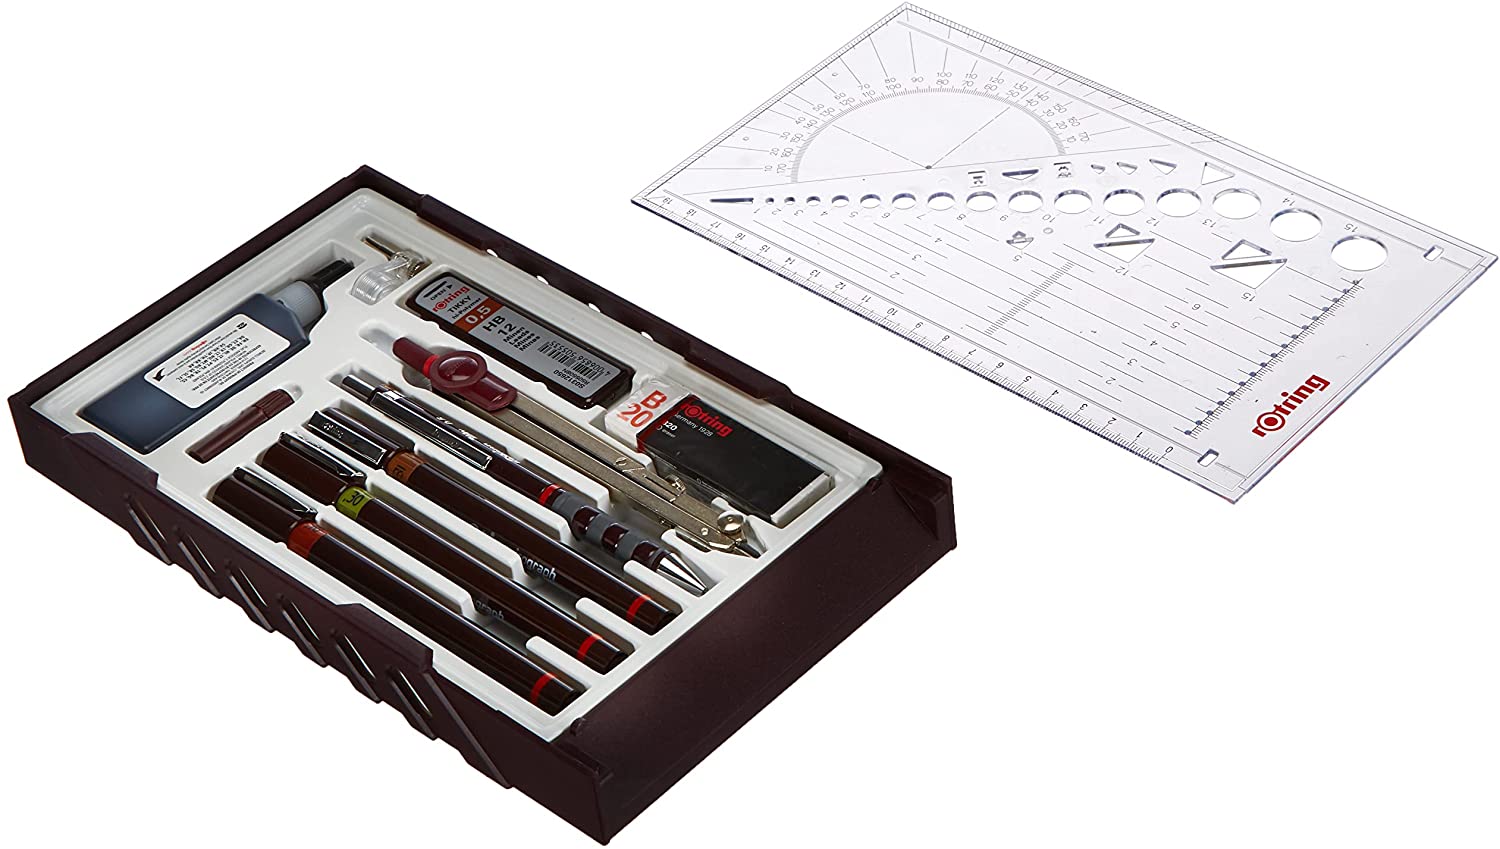 Rotring Rapidograph College Set